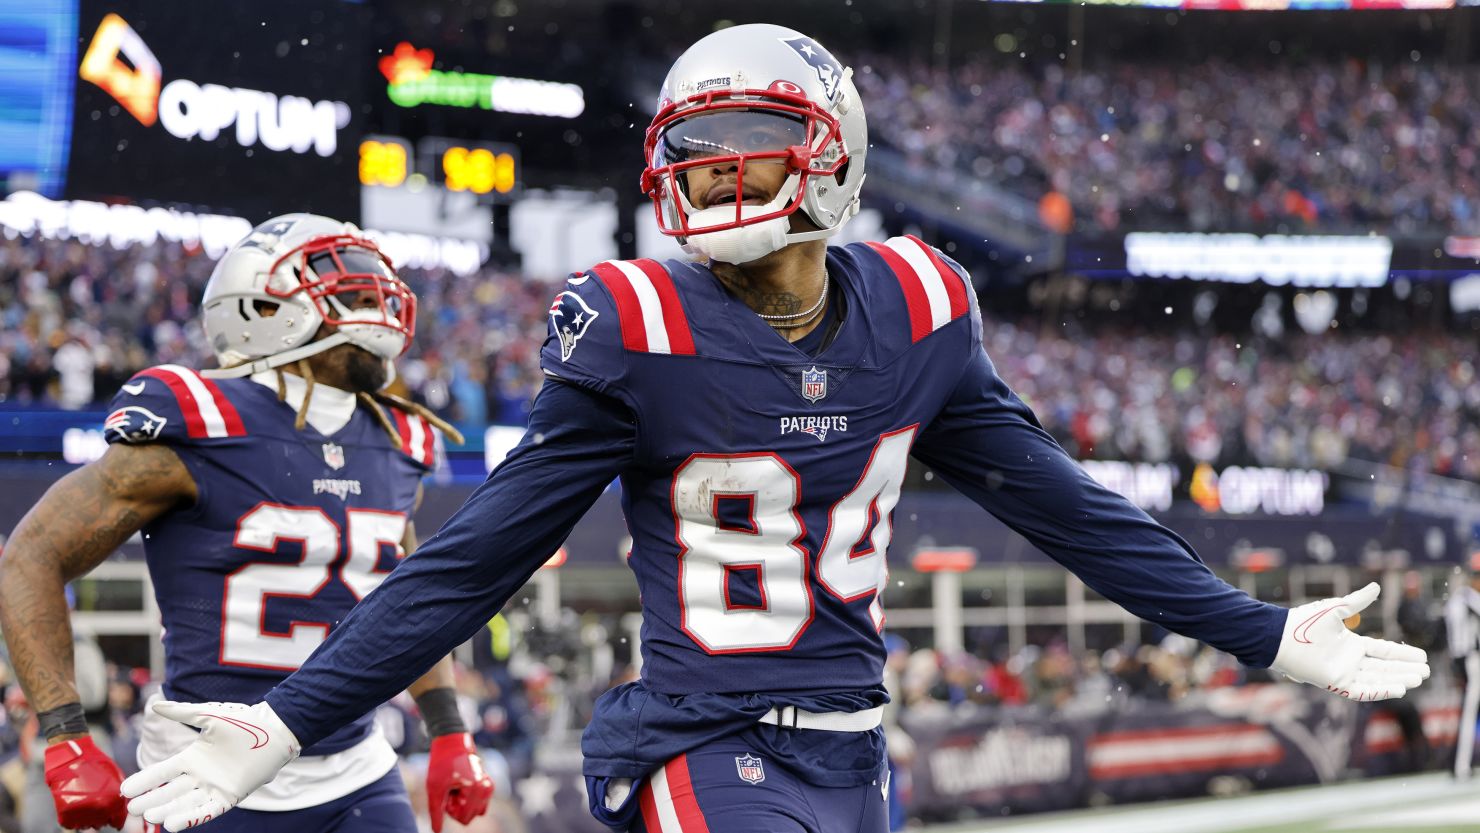 New England Patriots wide receiver Kendrick Bourne celebrates his touchdown during the against the Tennessee Titans.